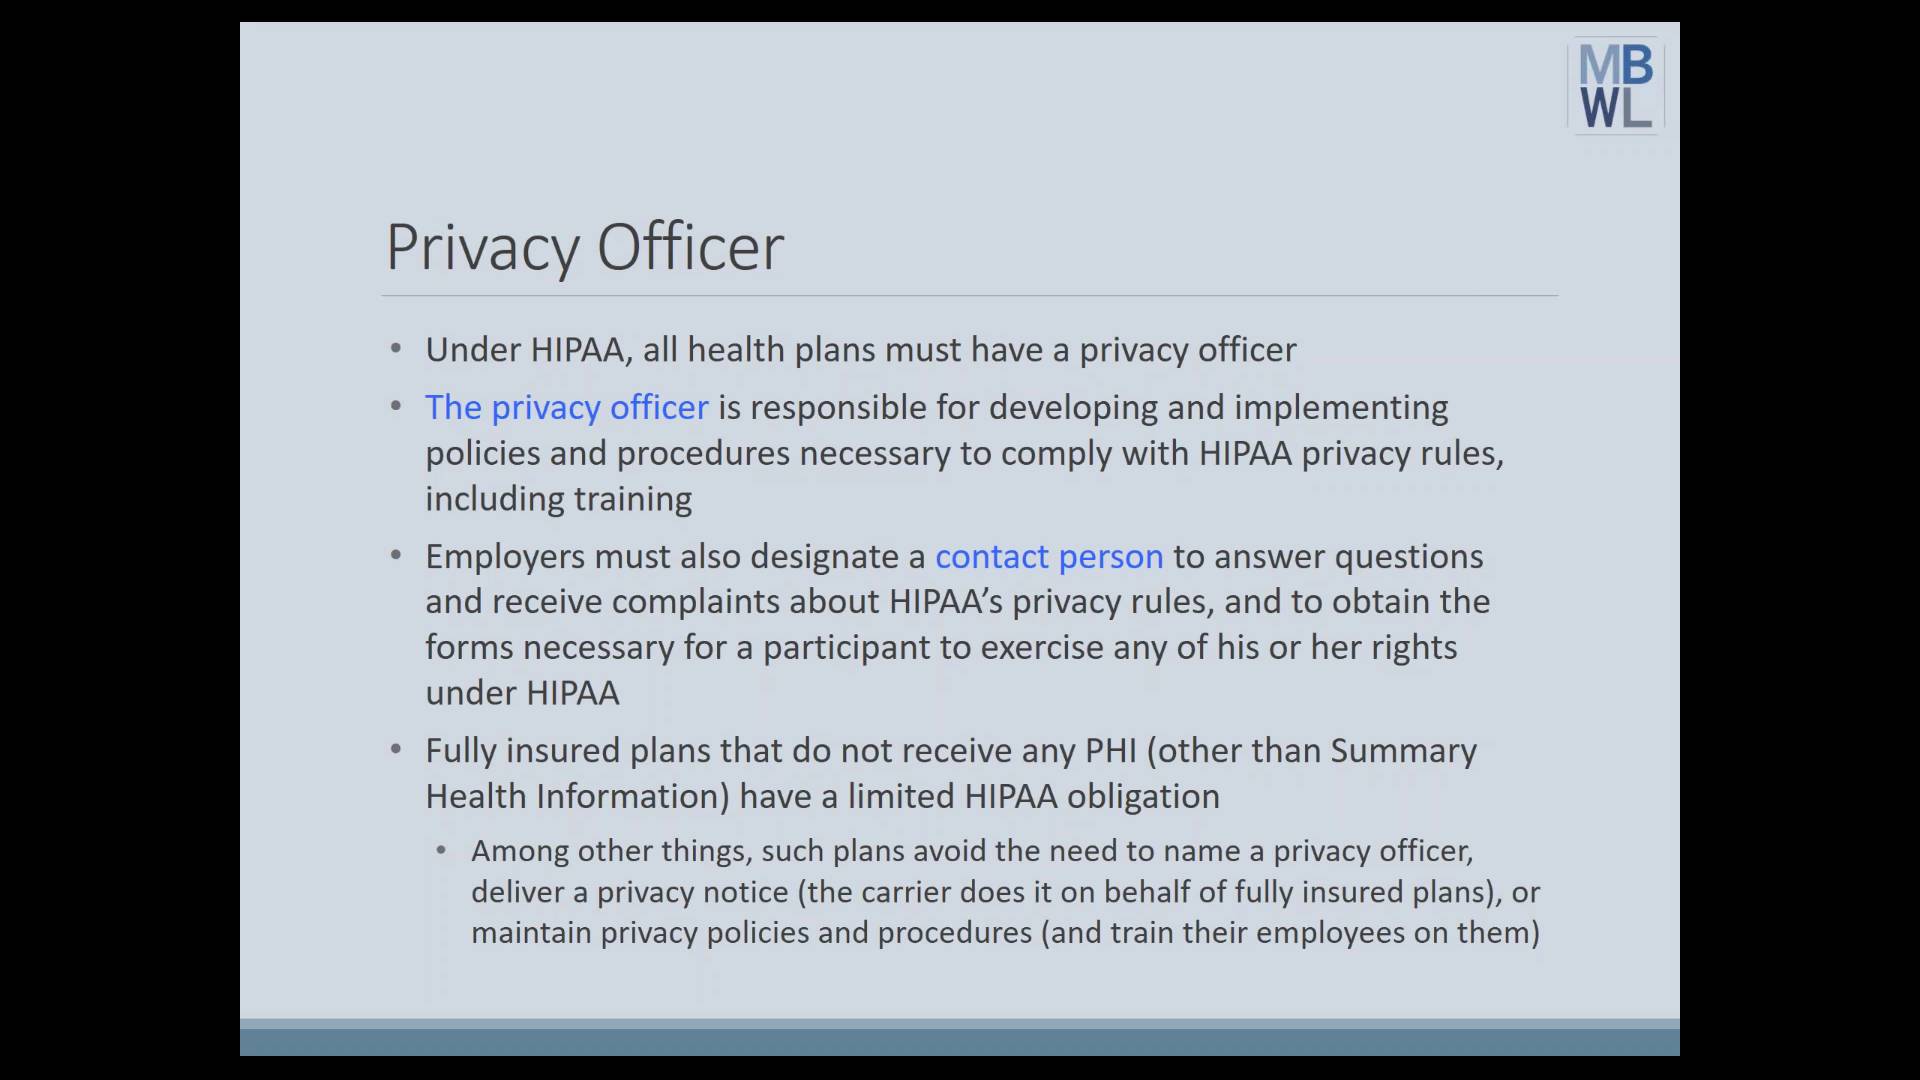 How do you obtain a copy of the HIPAA privacy policy?